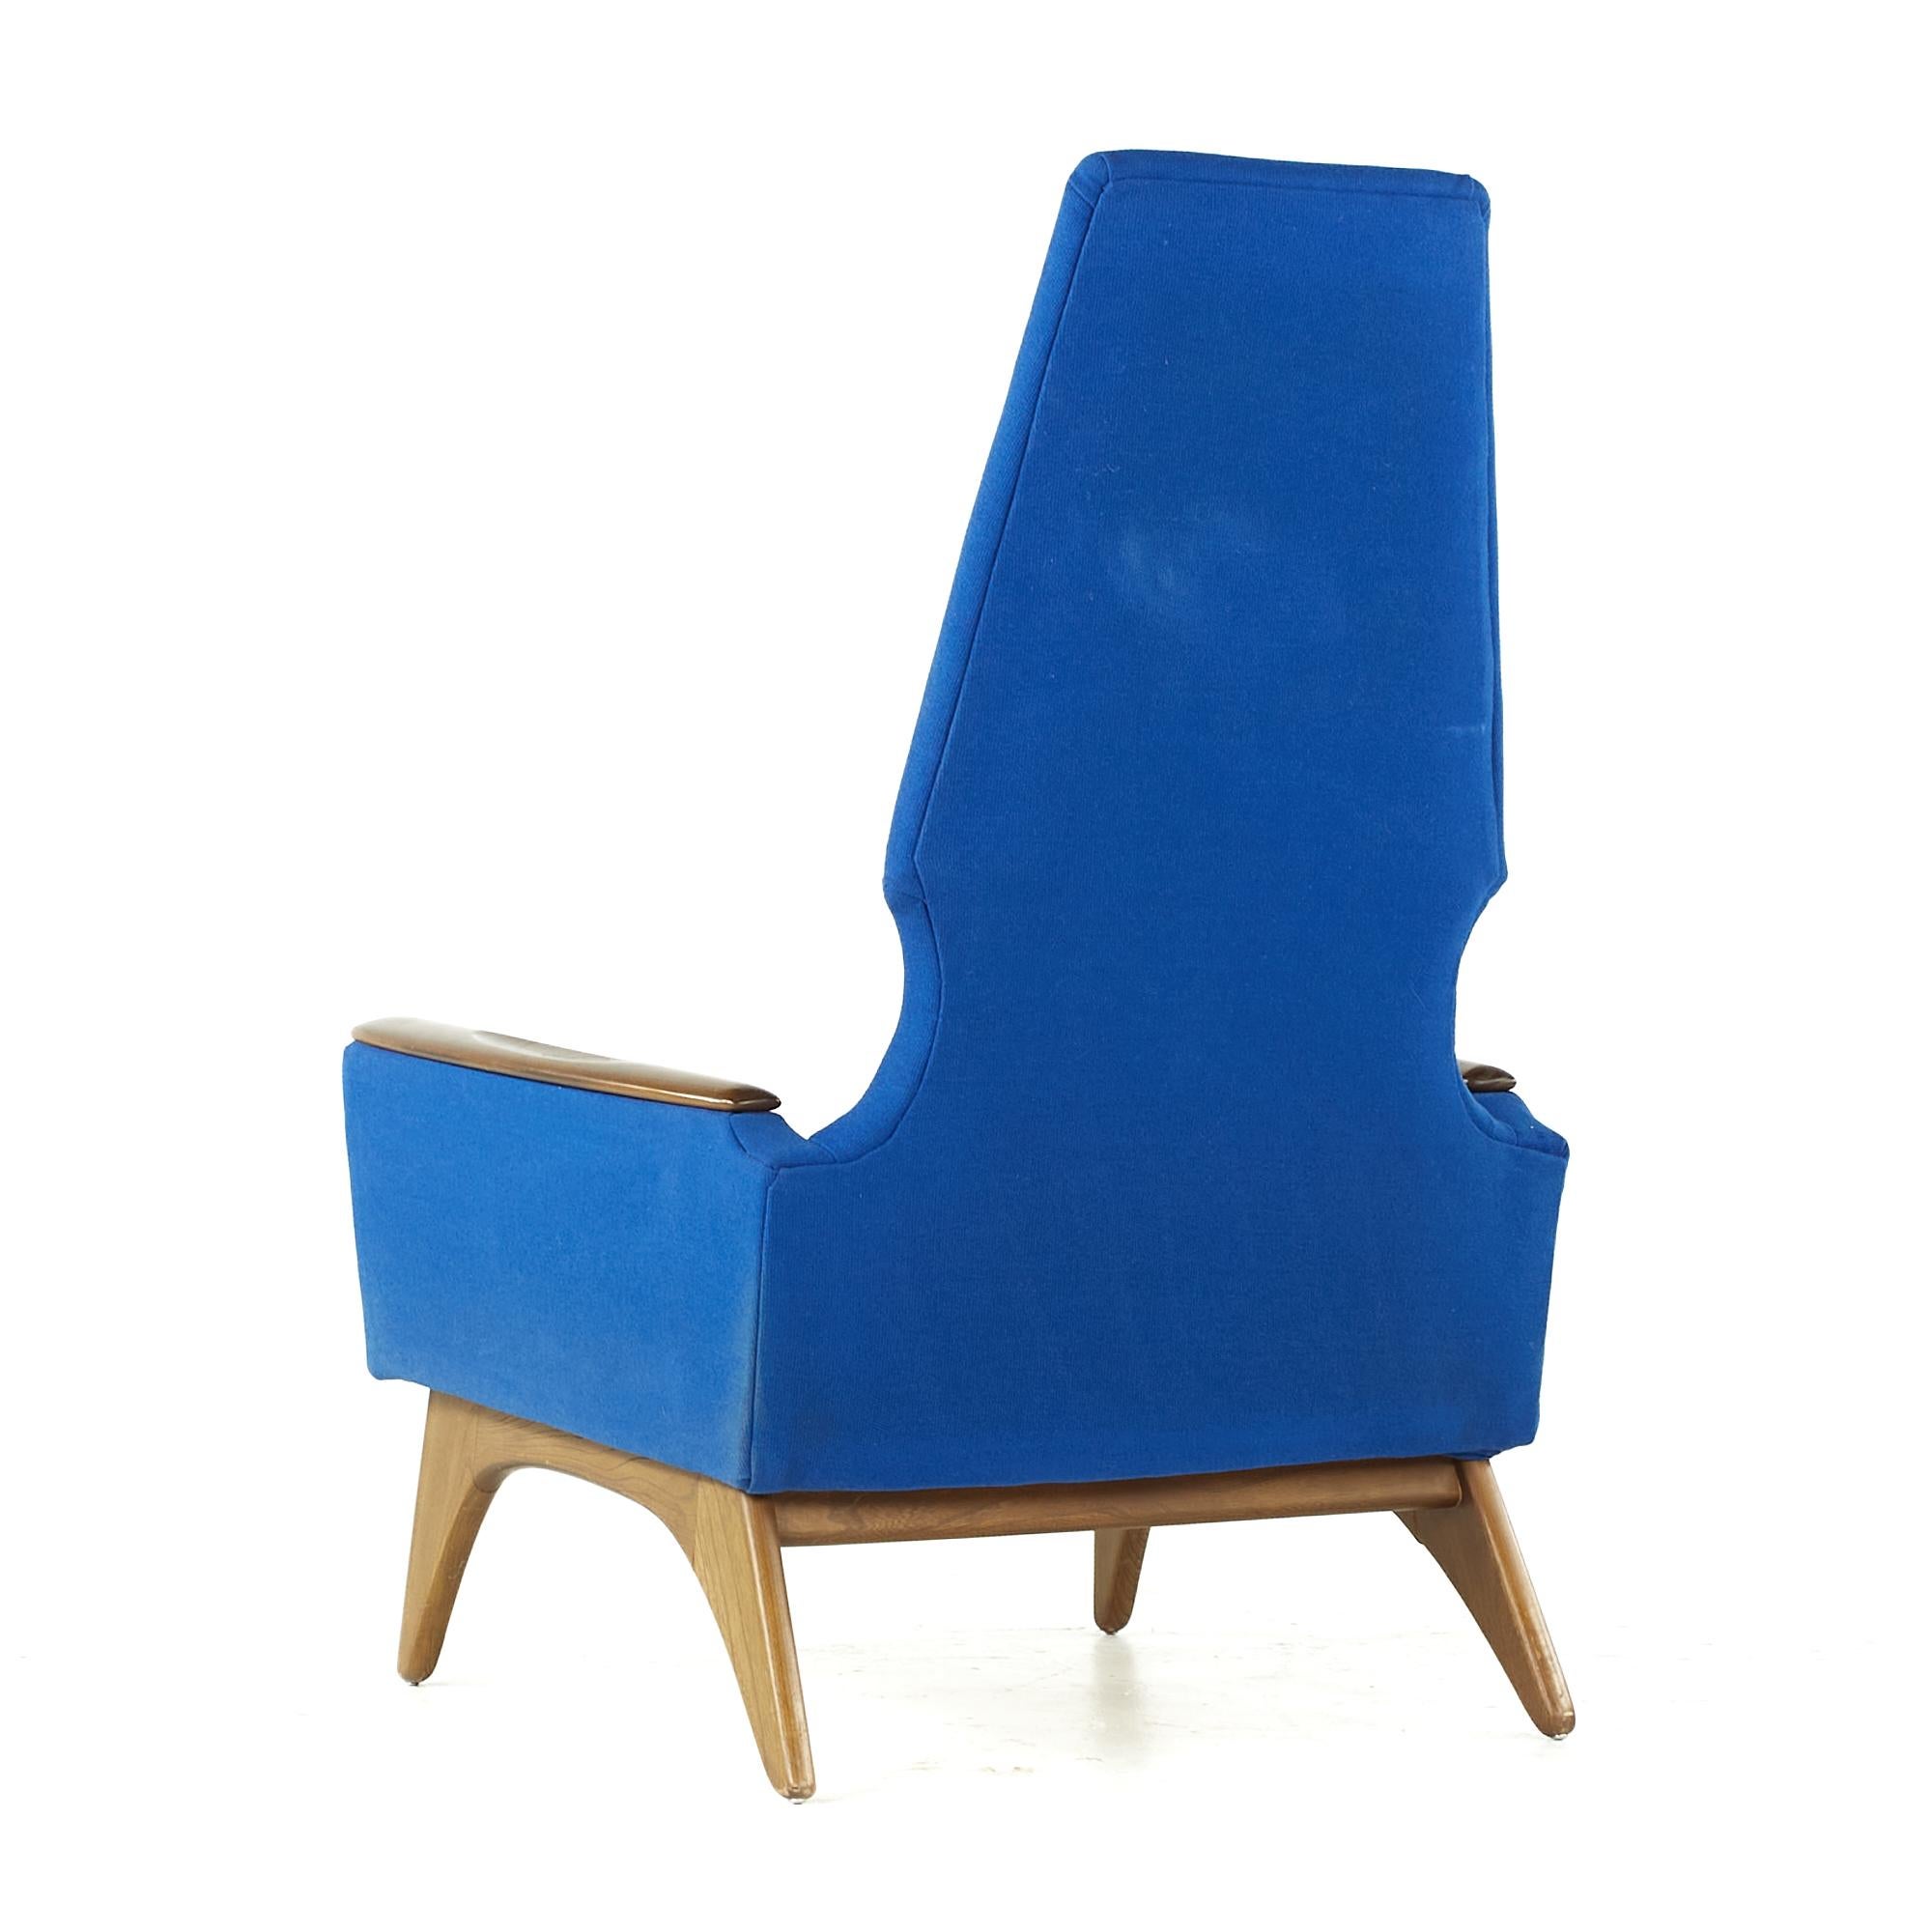 Late 20th Century Adrian Pearsall Style Mid Century Walnut Lounge Chair For Sale